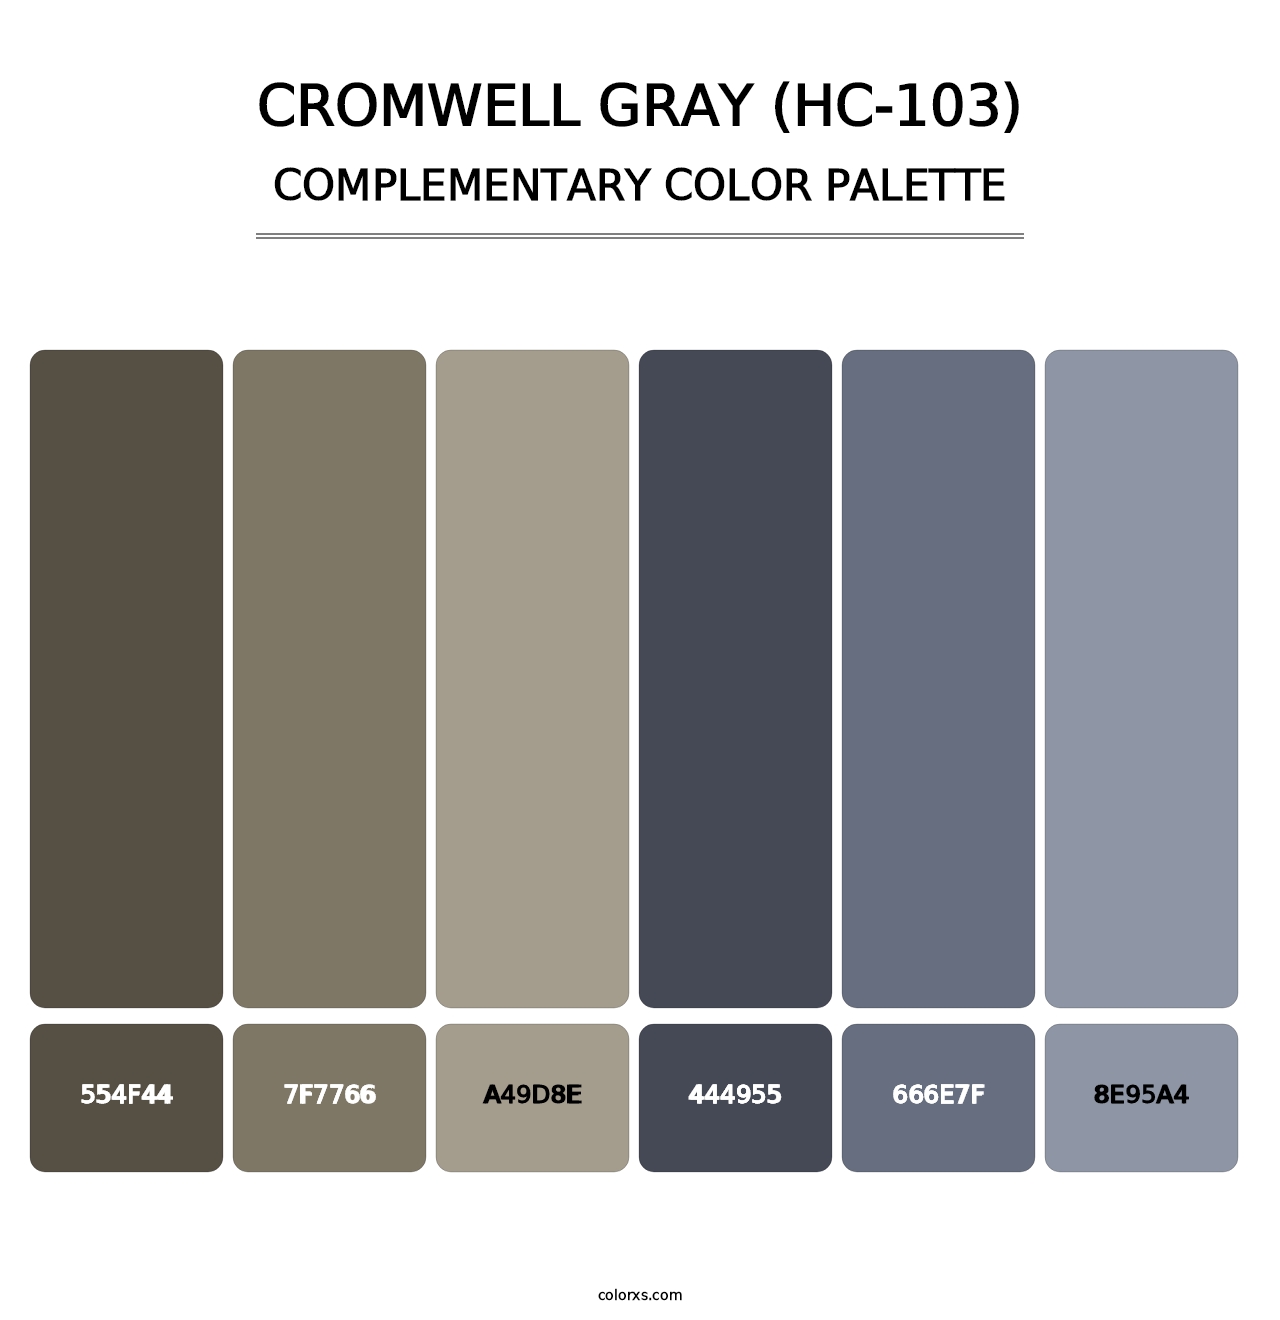 Cromwell Gray (HC-103) - Complementary Color Palette